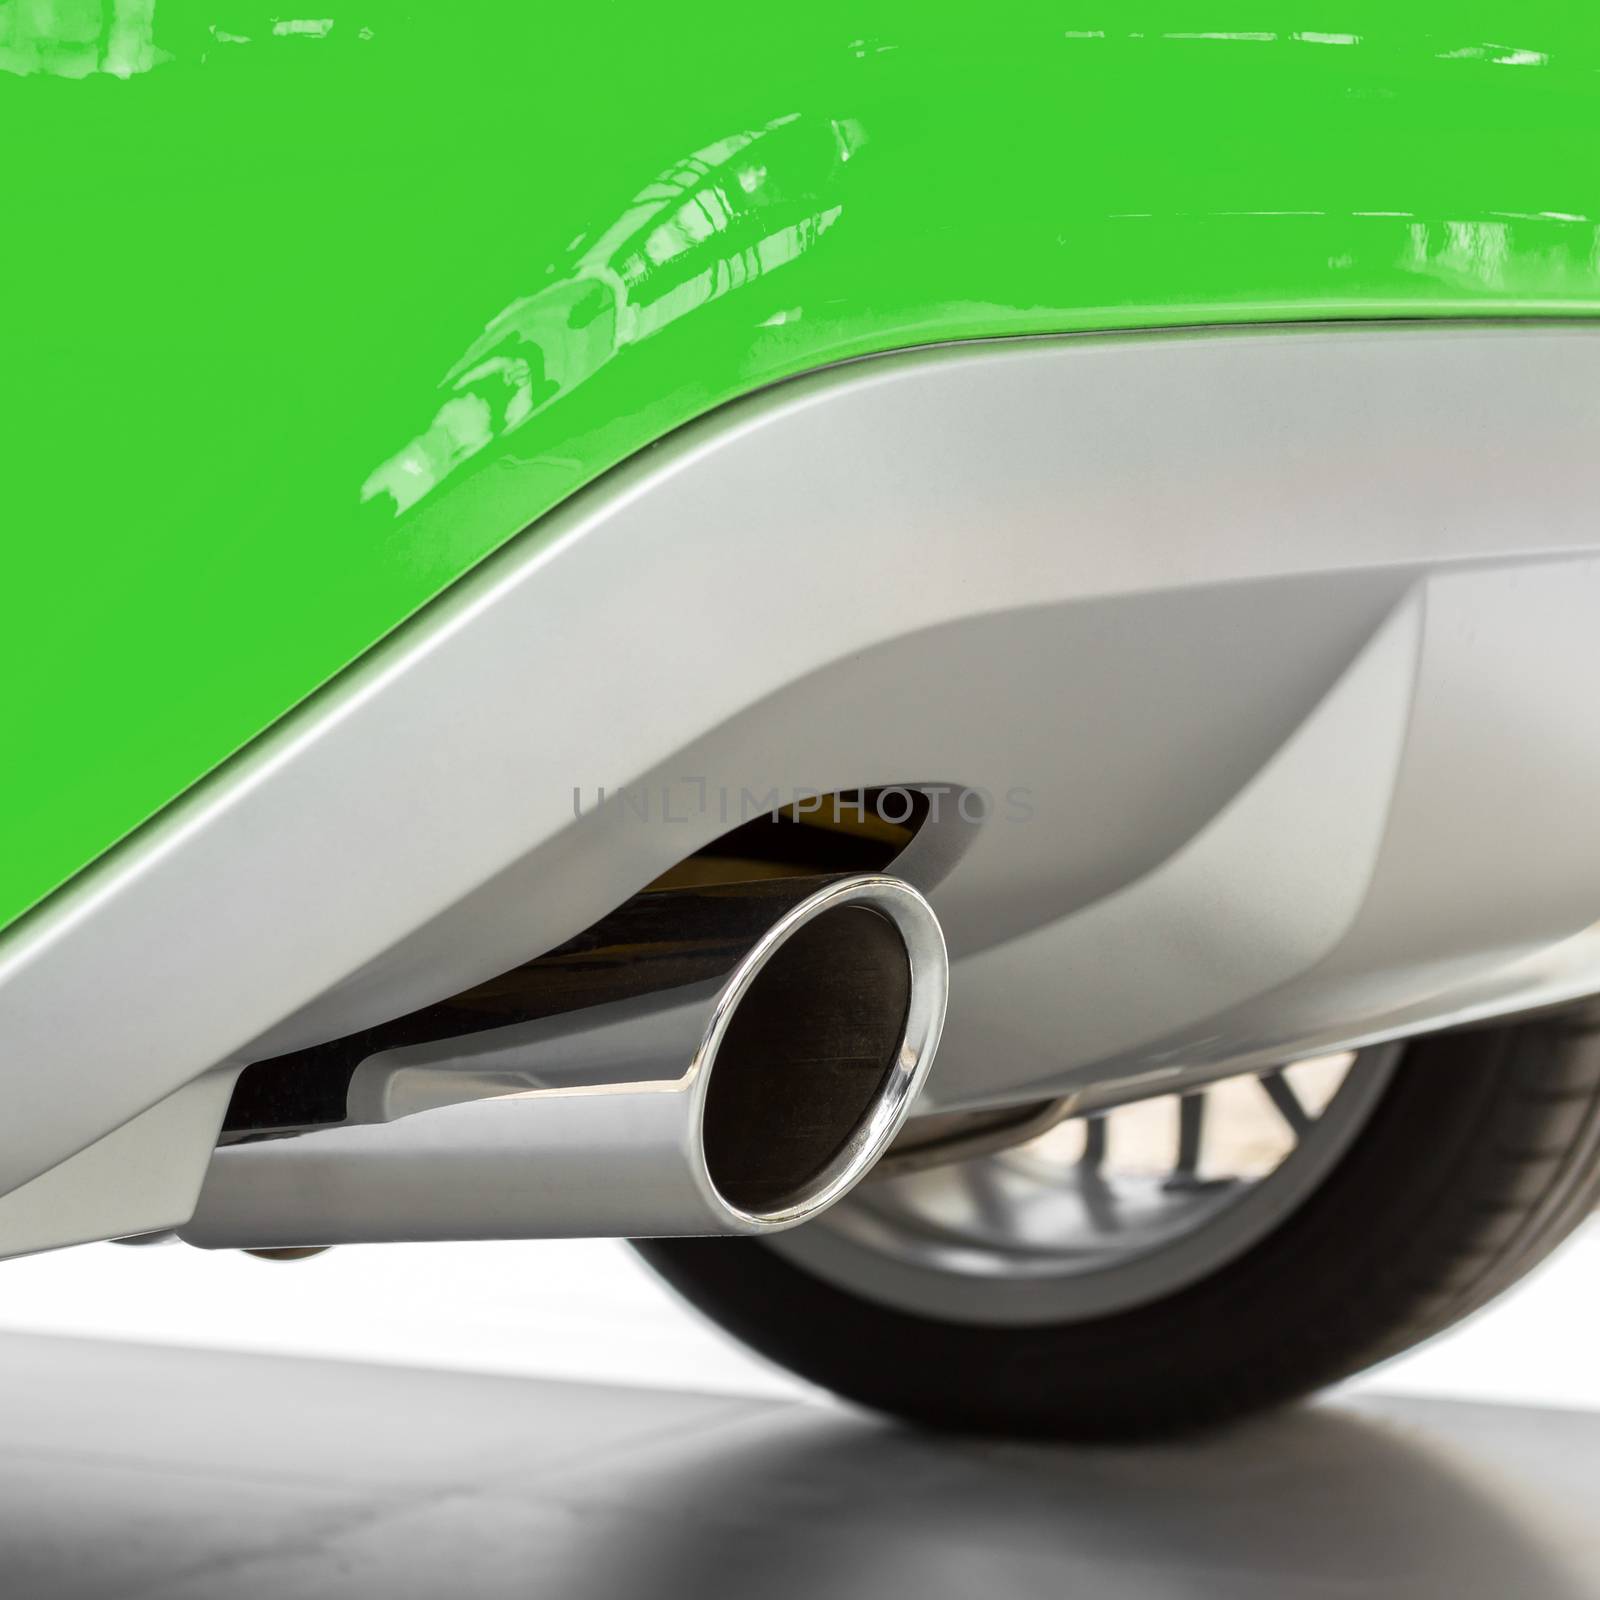 Eco car with new exhaust of a sports car. Ecology concept, low emission, low environmental impact.